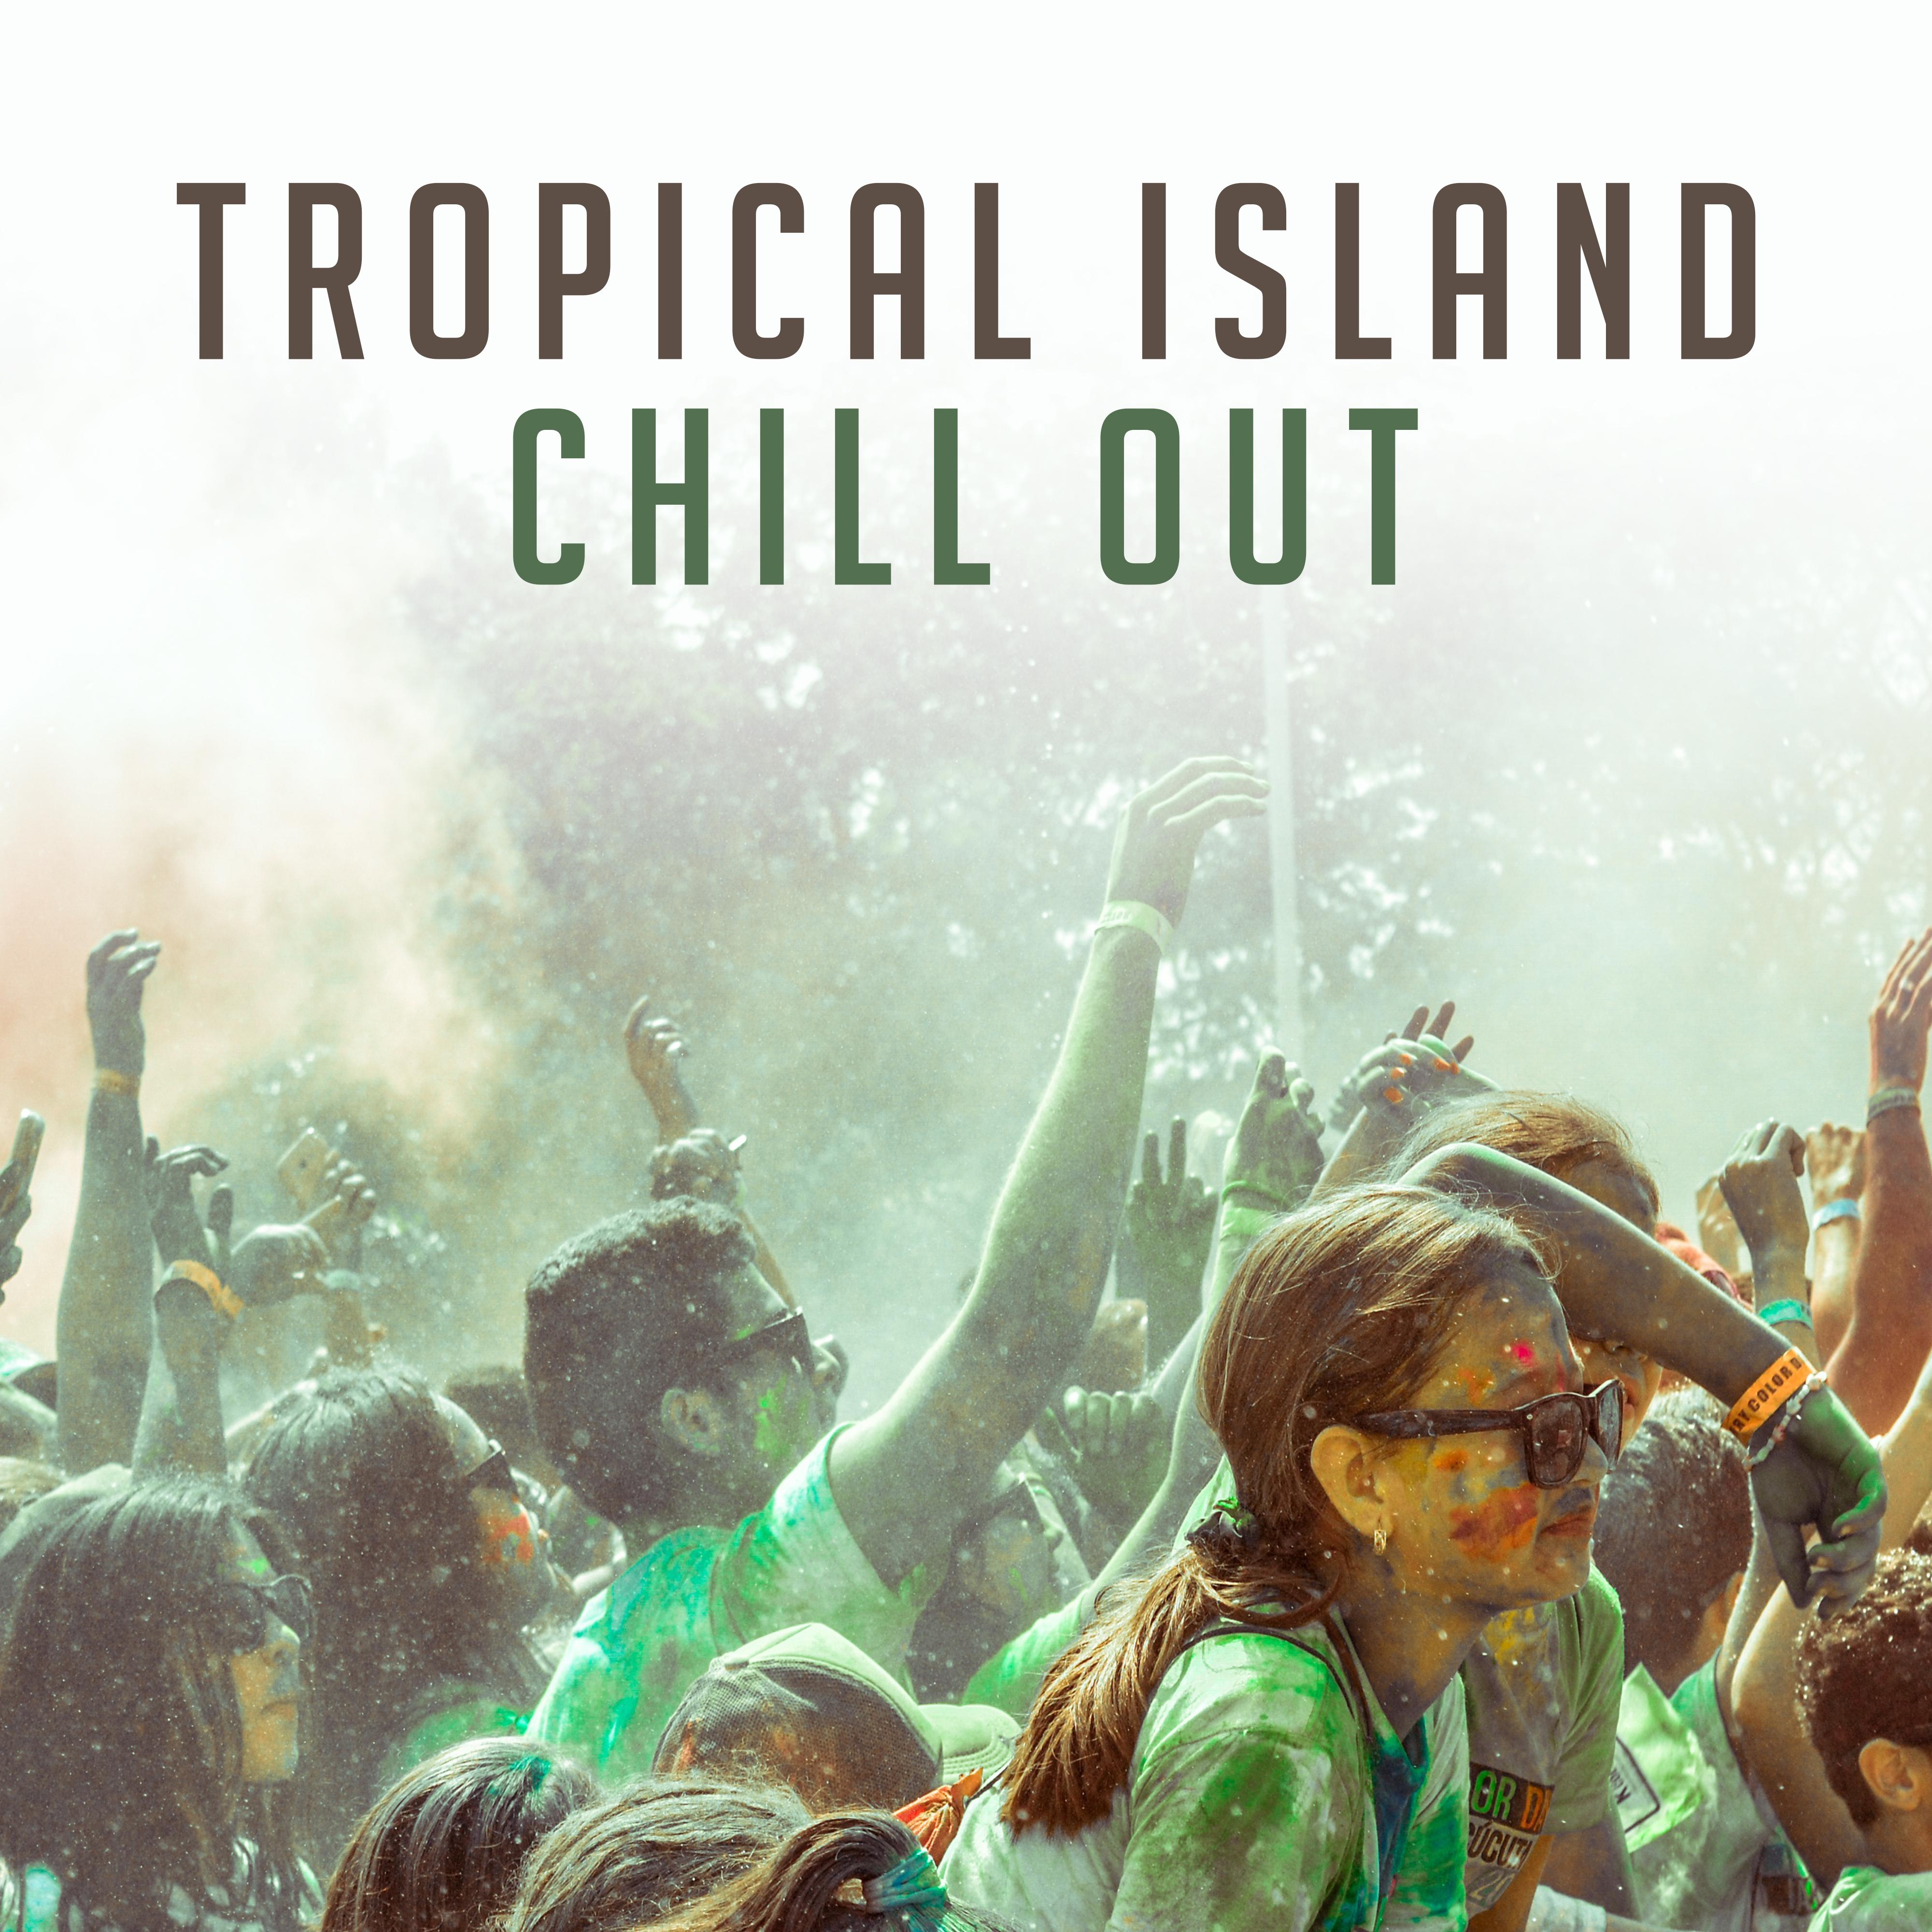 Tropical Island Chill Out – Summer Music, Beach House, Tropical Island Sounds, Relaxing Waves